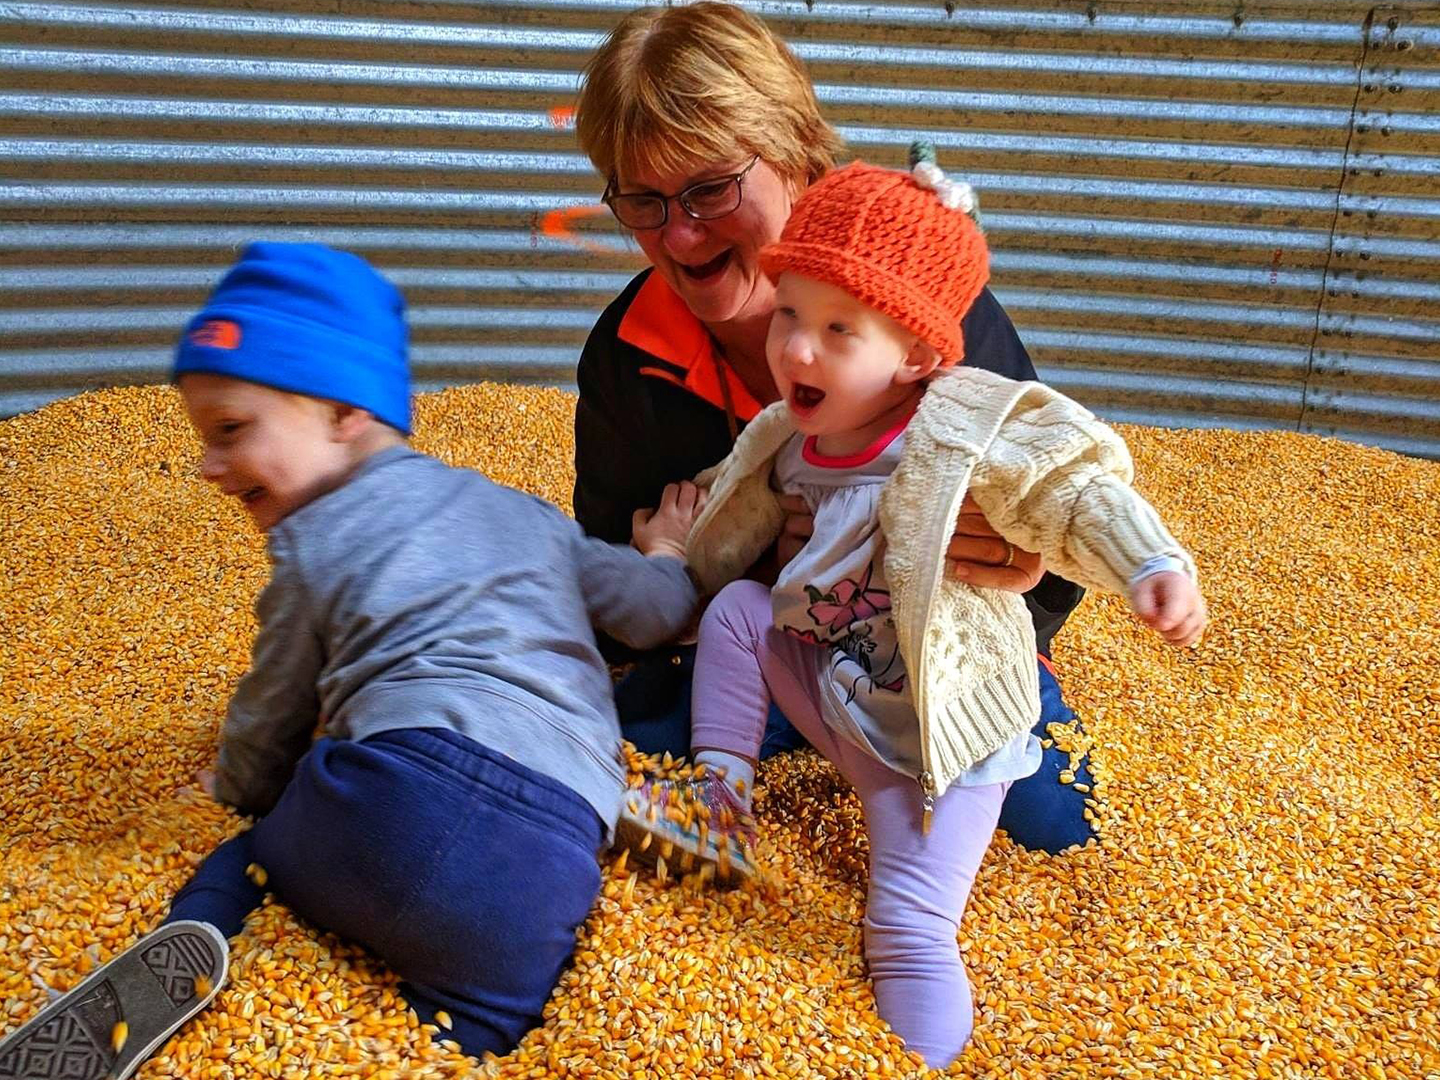 Noreen with her two grandkids playin inside the corn pit